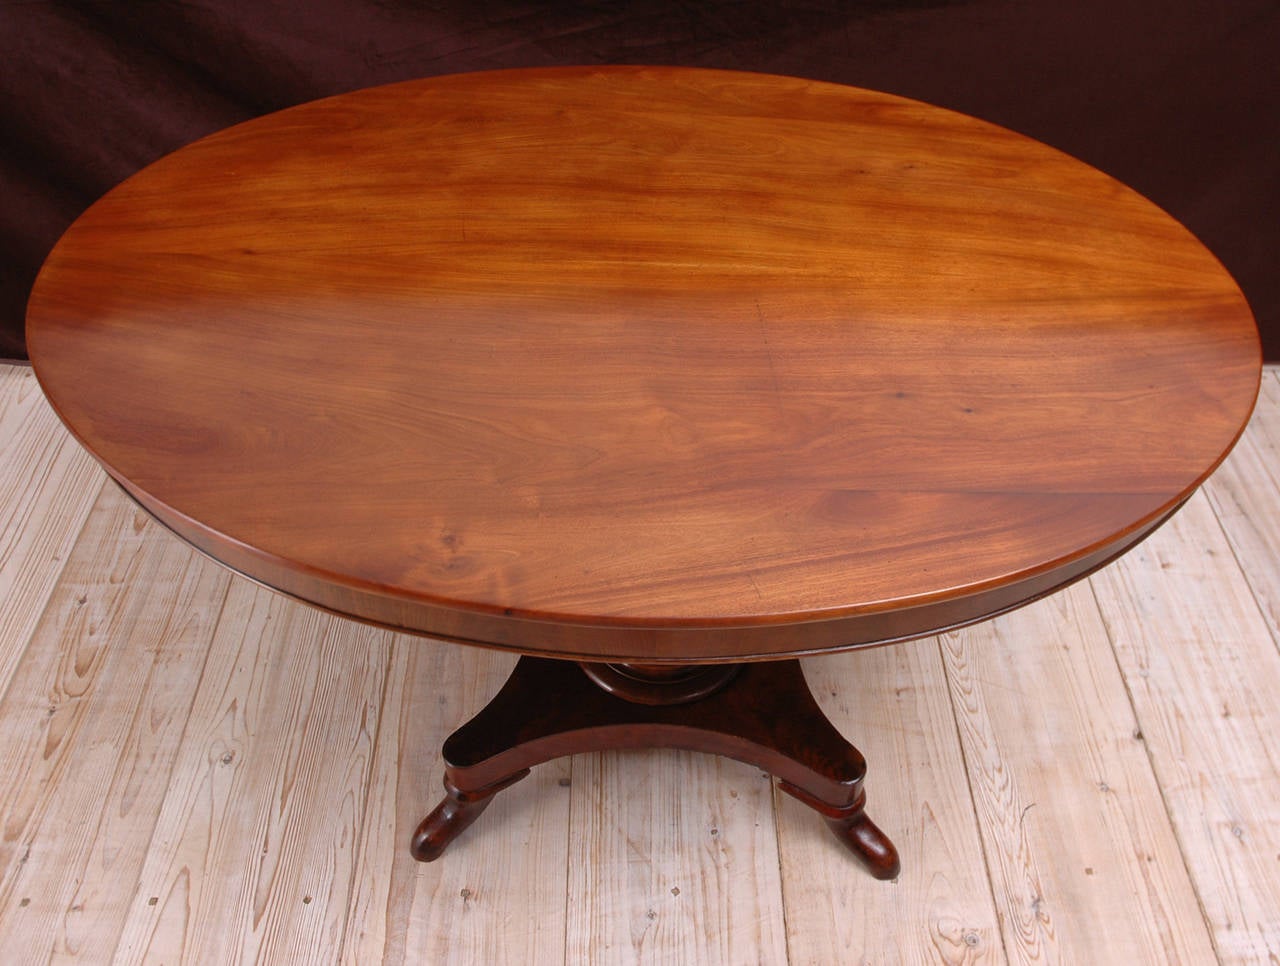 Center Table in mahogany with oval top resting on turned baluster-pedestal over quatre-form base, Denmark, c. 1840. This type of table typically accompanied a salon including a sofa, side chairs and arm chairs and would have been used in front of